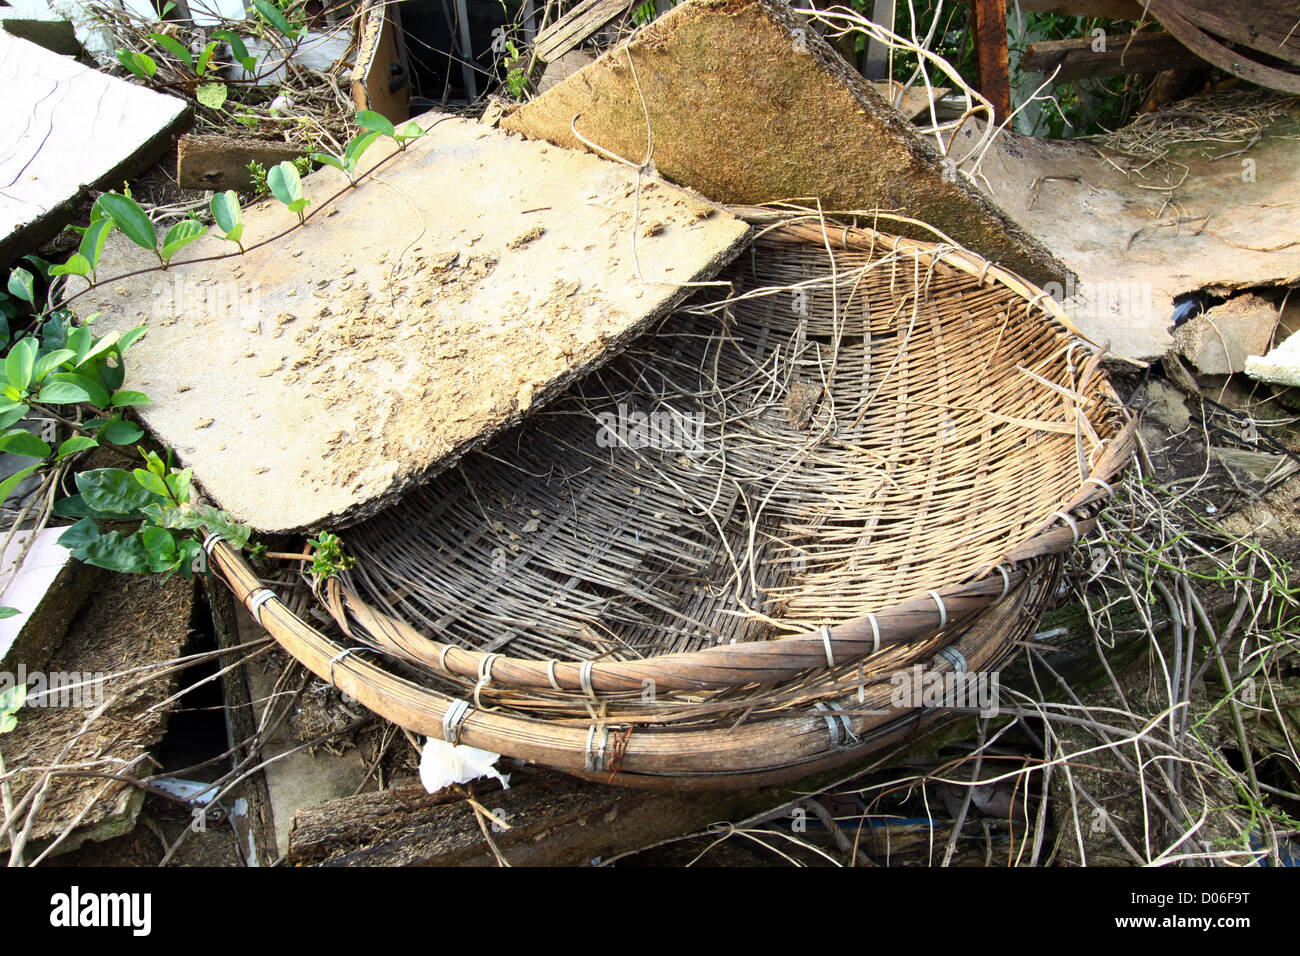 Baskets for farmers use Stock Photo